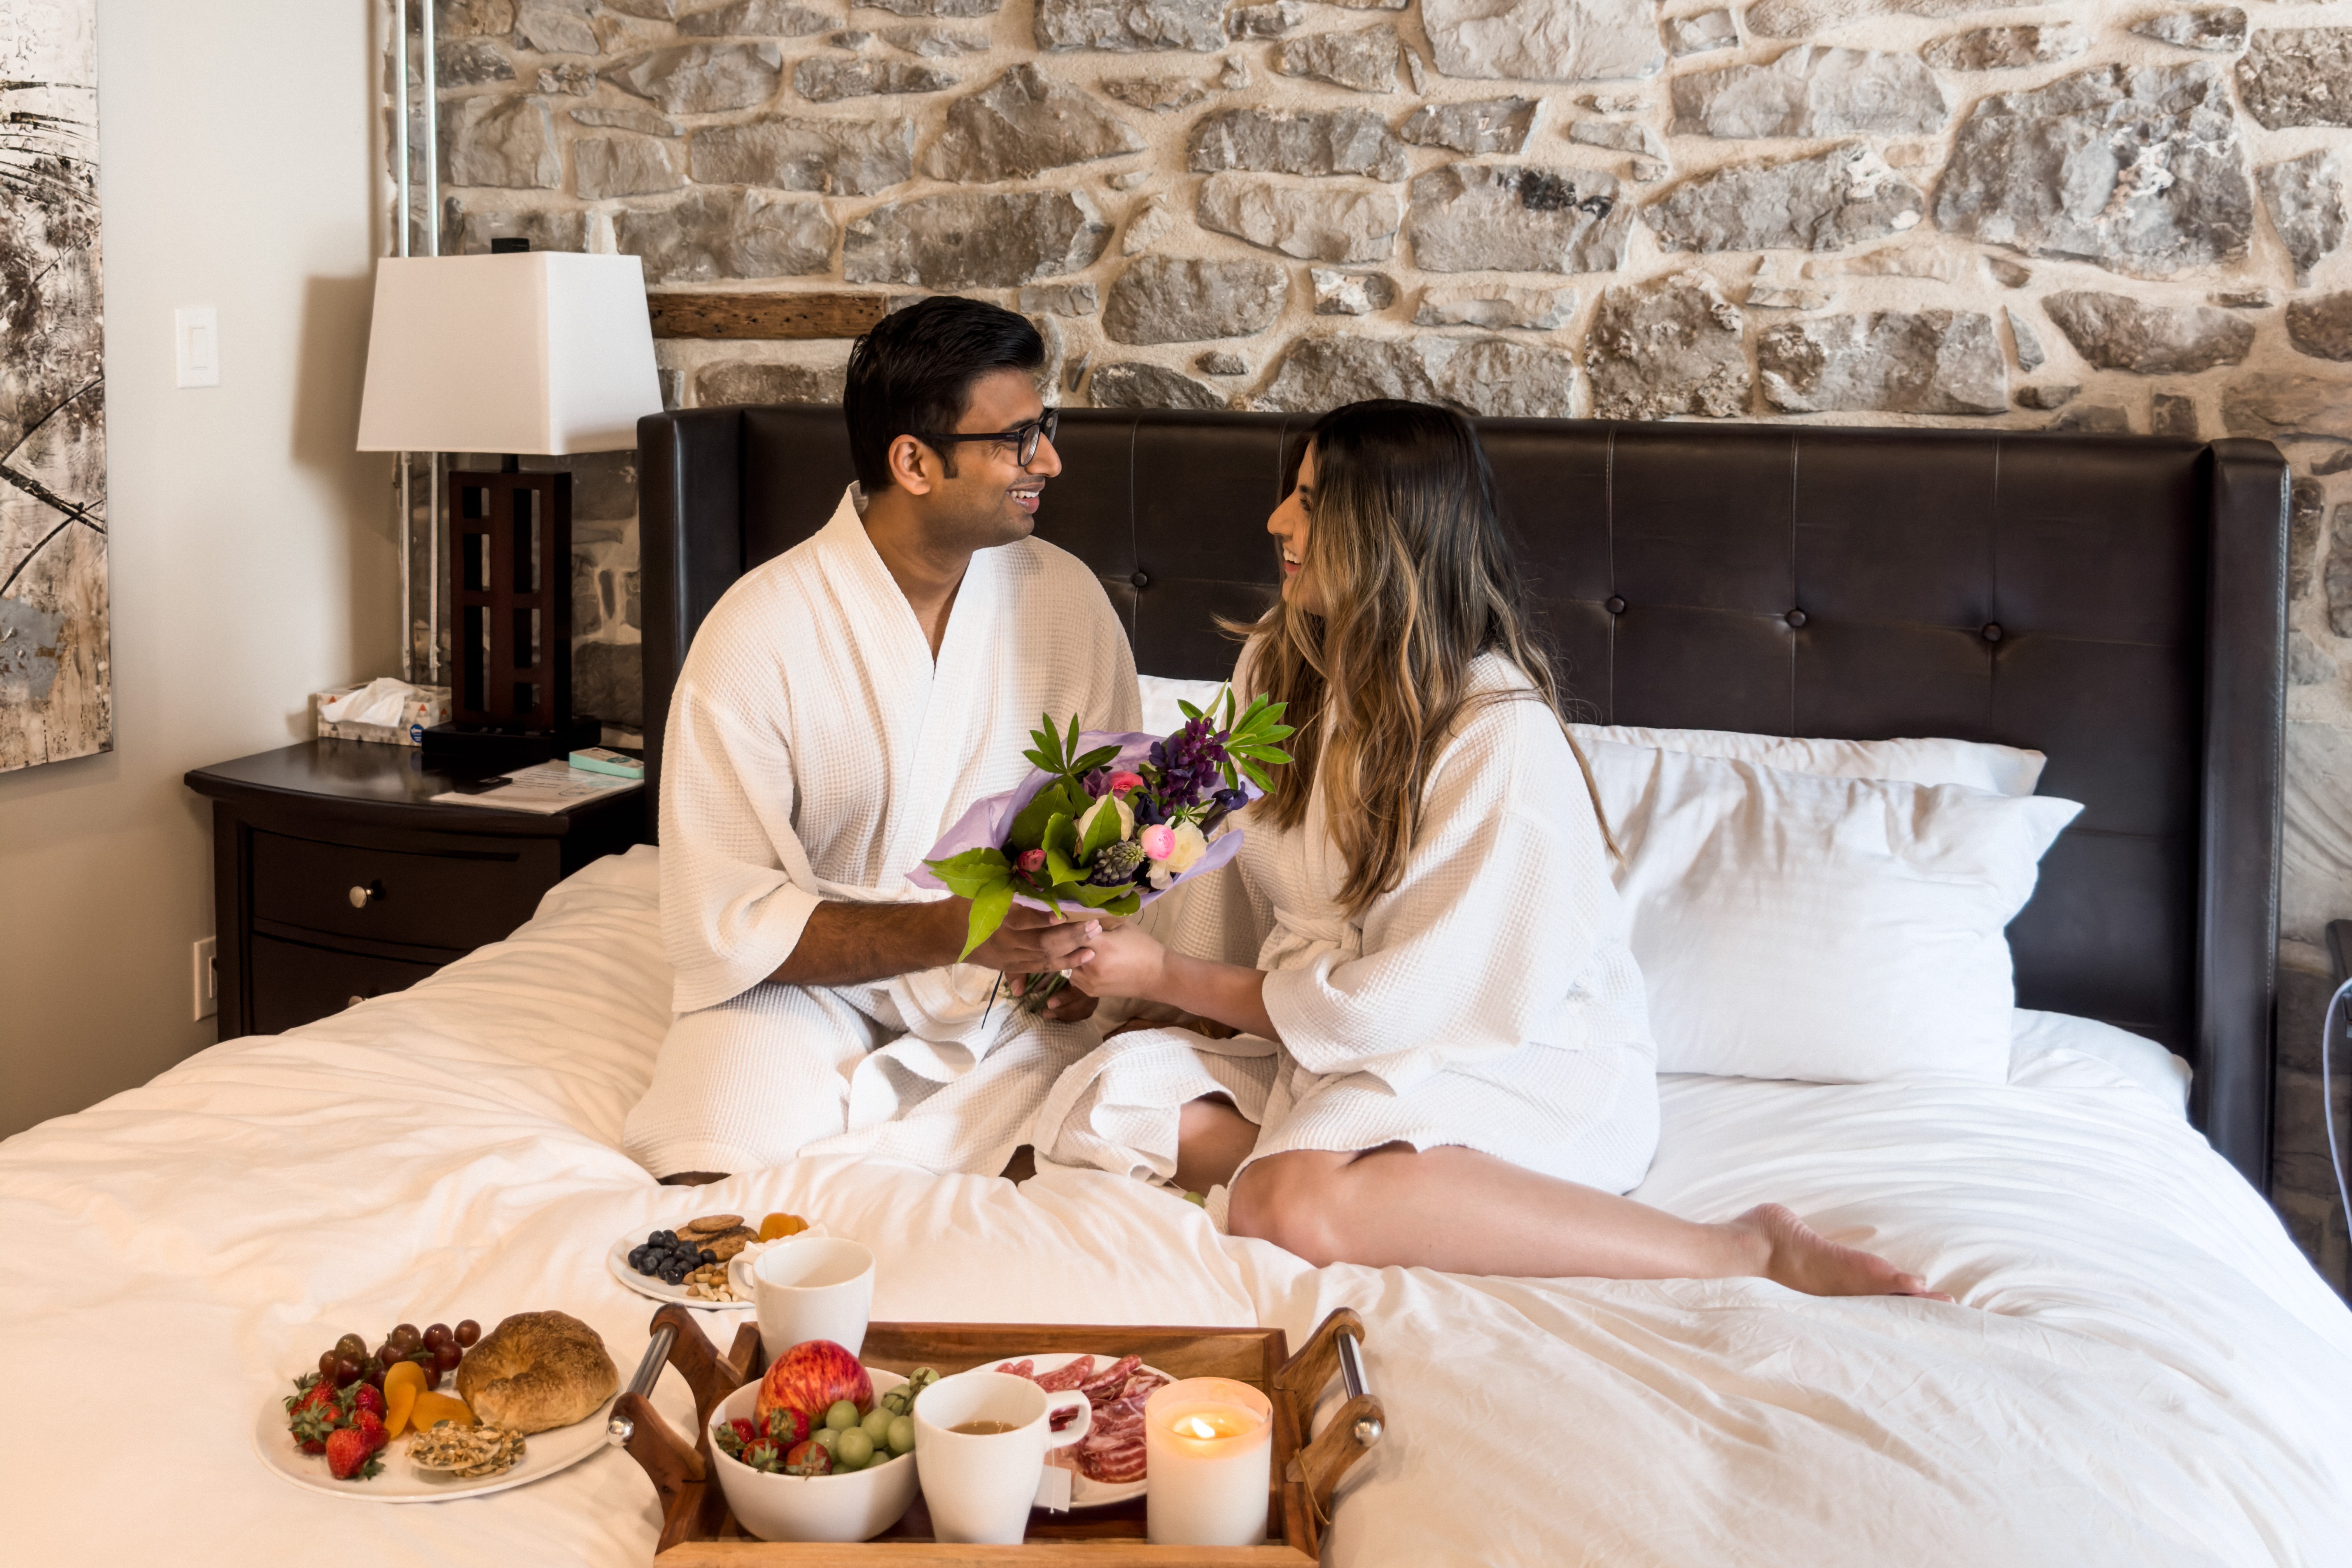 Couple in robes sit affectionately on bed. The two are holding flowers from Wilding Acres. There is a breakfast platter placed on the bed.